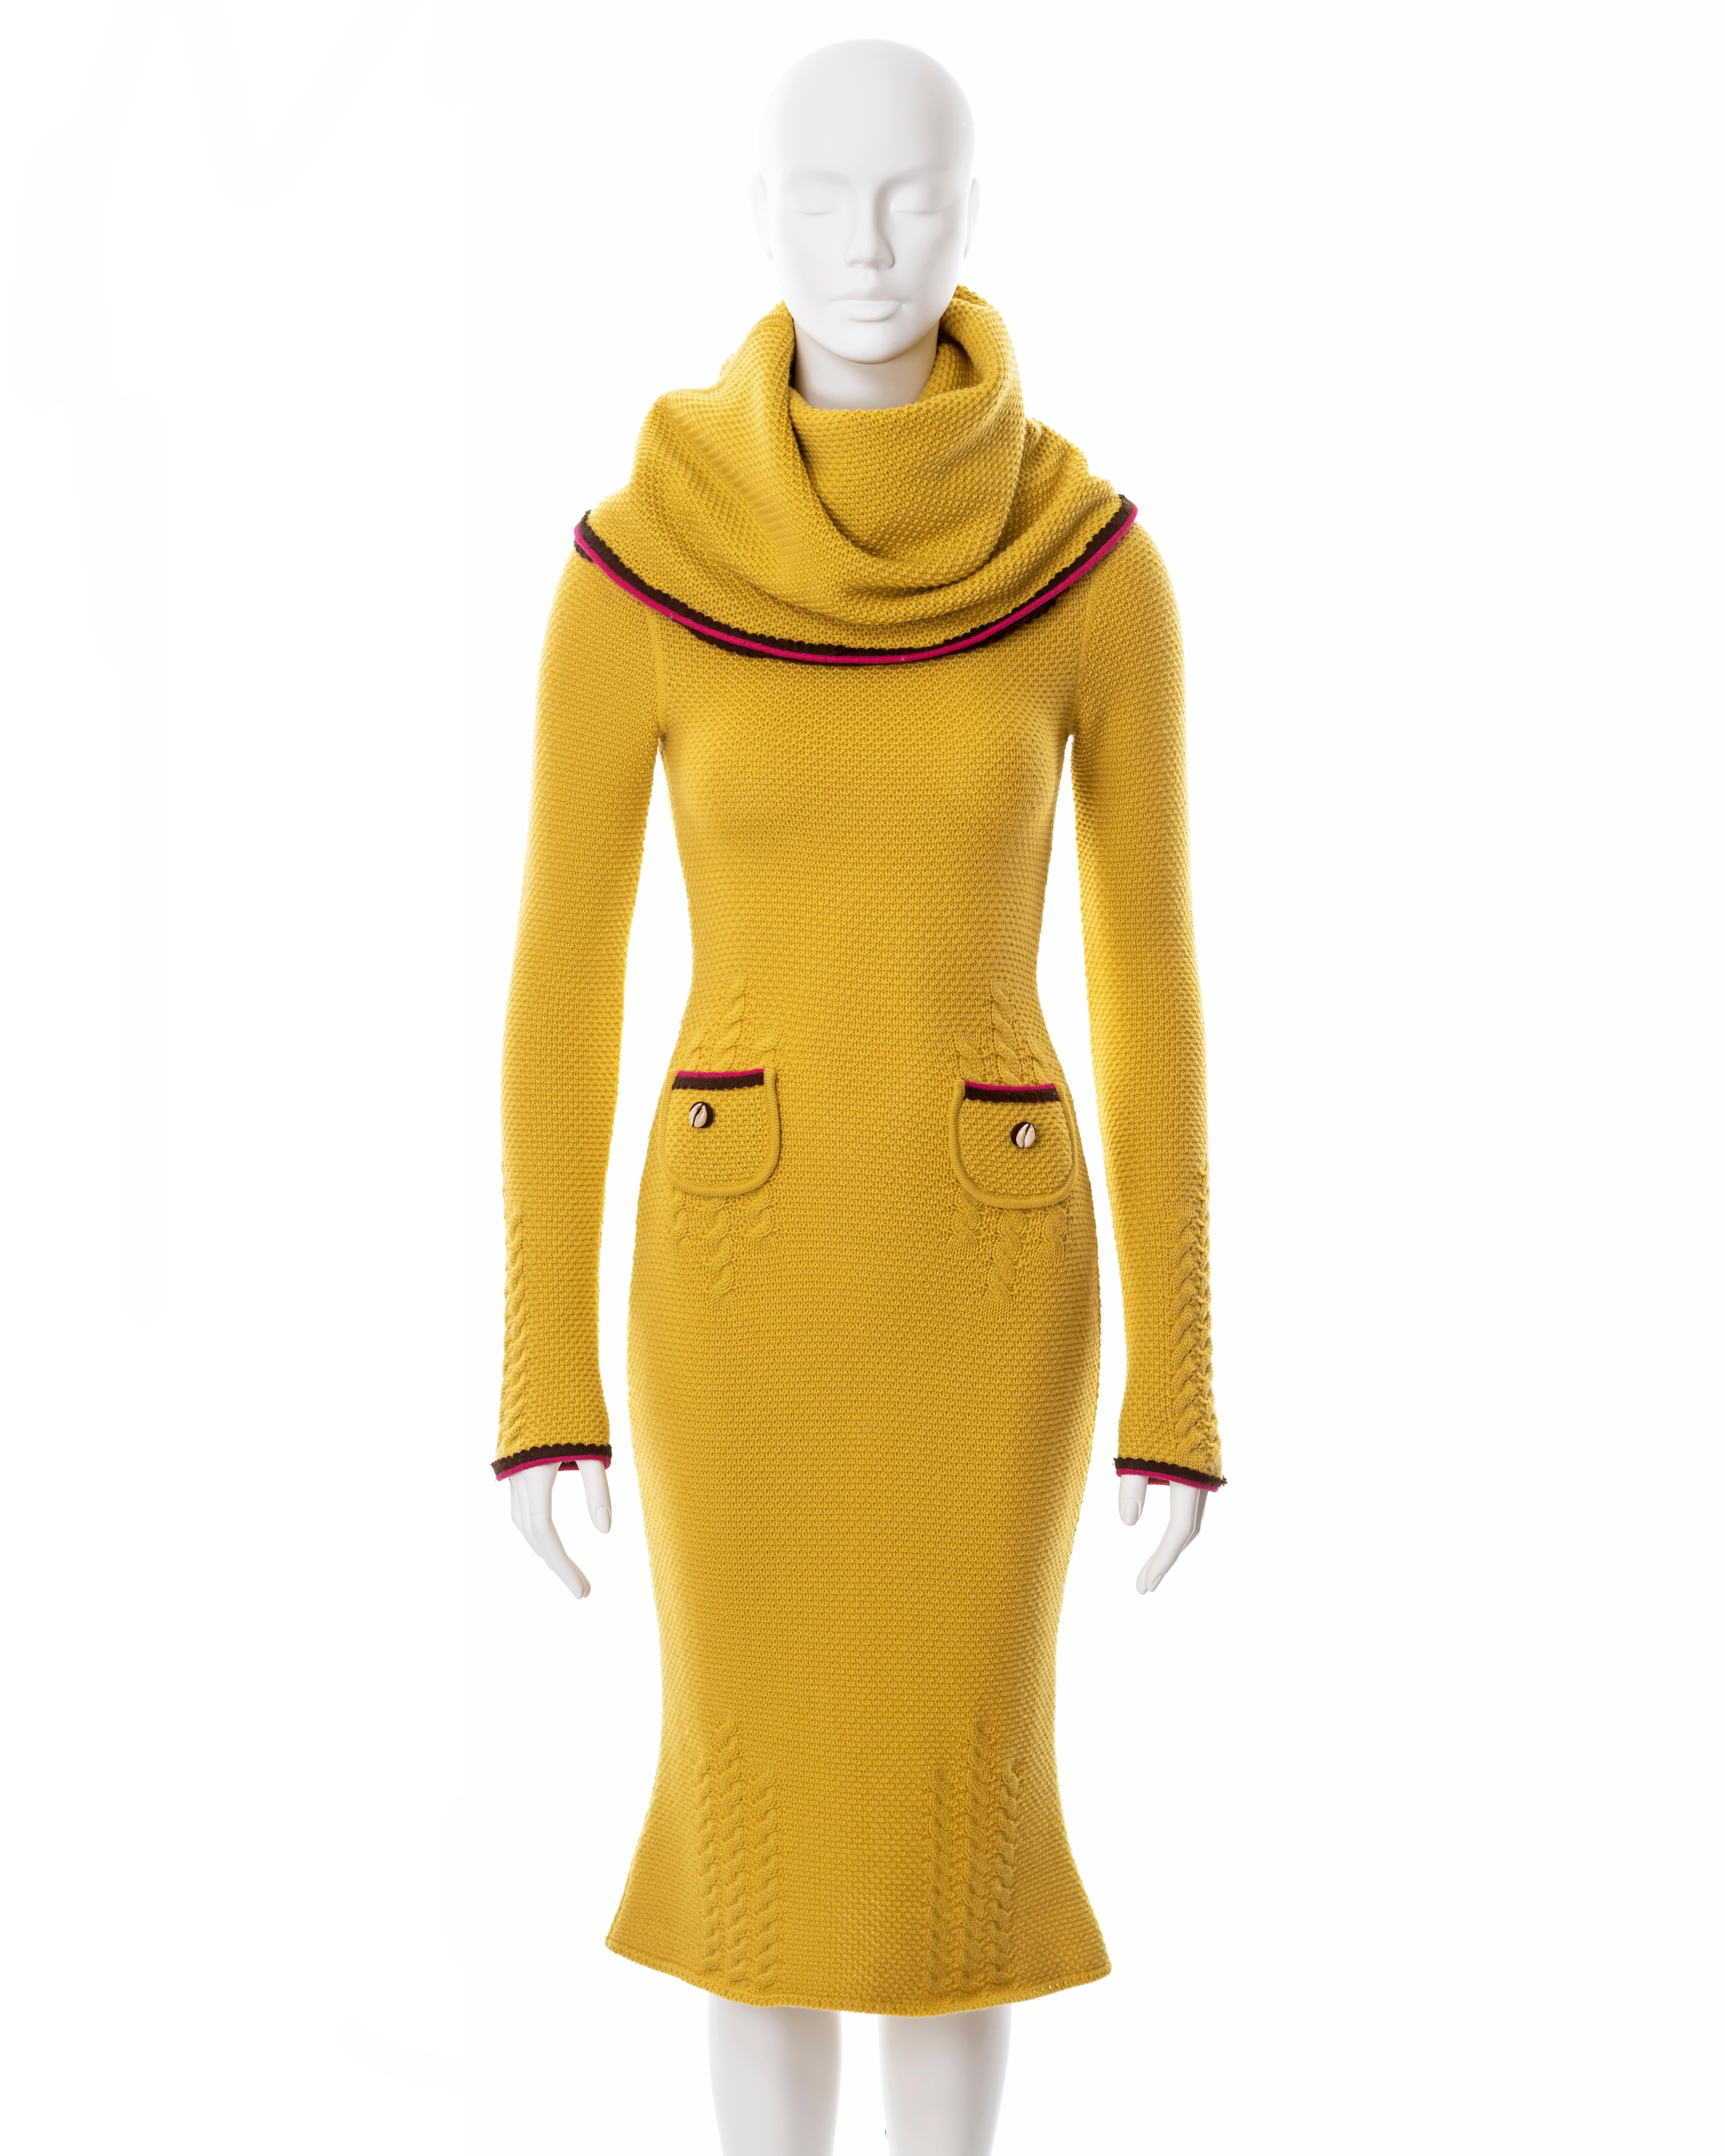 ▪ John Galliano yellow waffle-knit long sleeve dress
▪ Fall-Winter 1999
▪ Outsized turtleneck doubles as a hood
▪ Waffle-knit and cable-knit combination  
▪ Burgundy and pink felt scalloped-edged trim
▪ 2 small front pockets with Cowrie shell